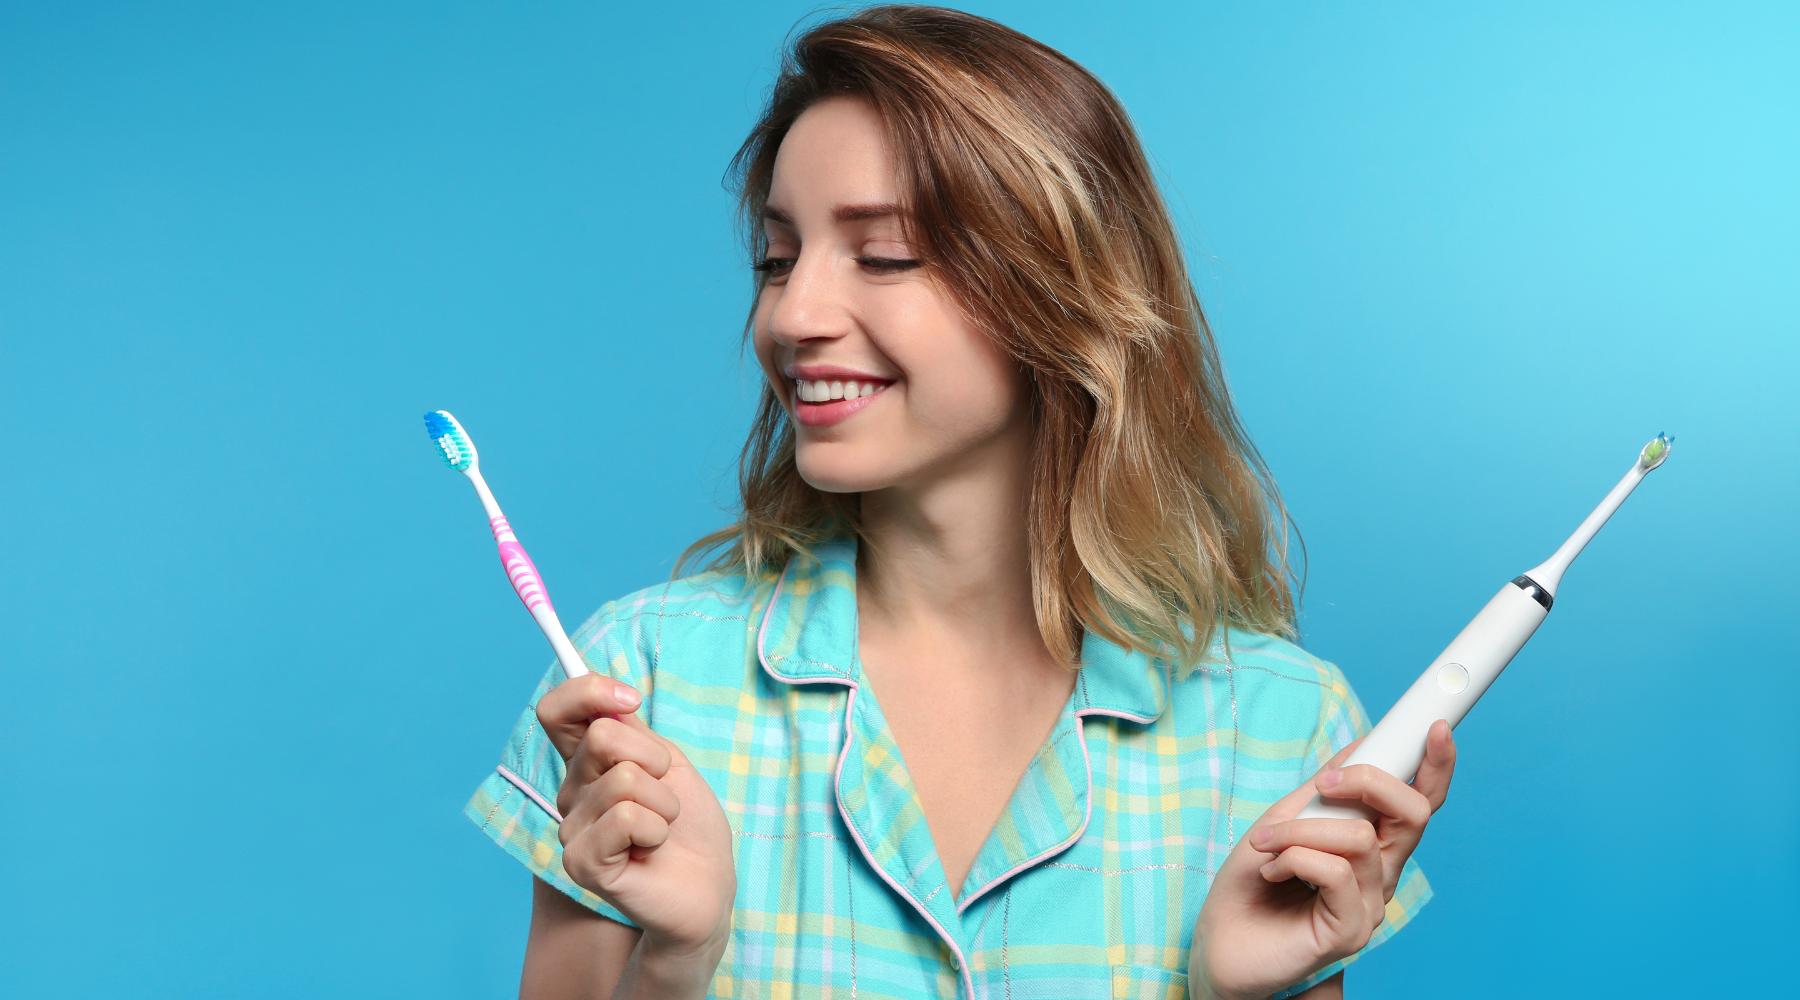 What Is a Sonic Toothbrush?